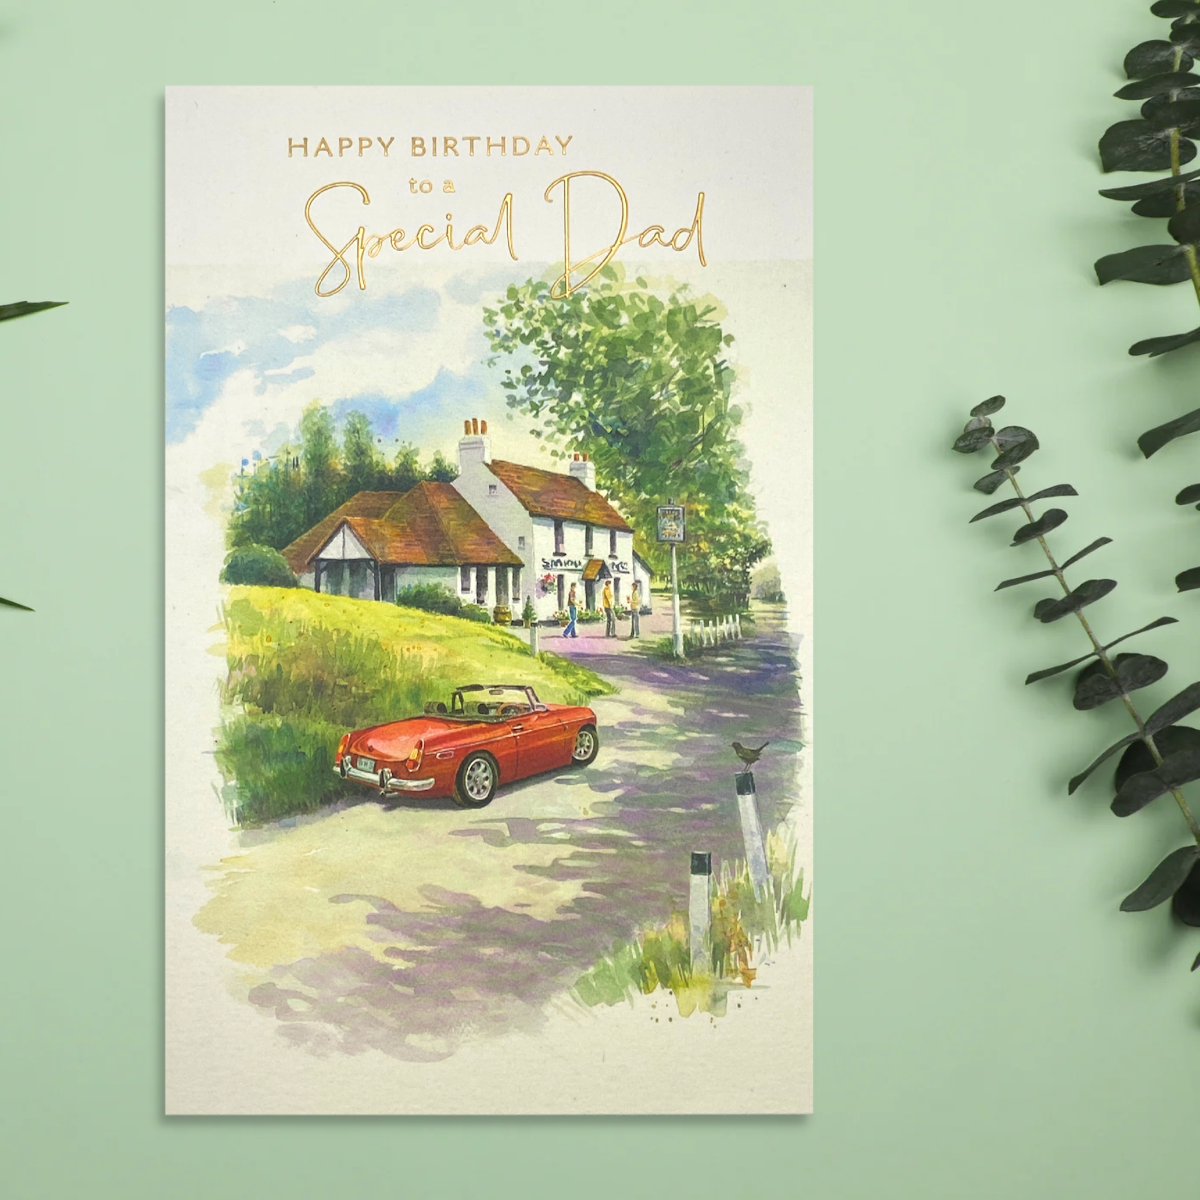 Special Dad Birthday Card Design Displayed In Full